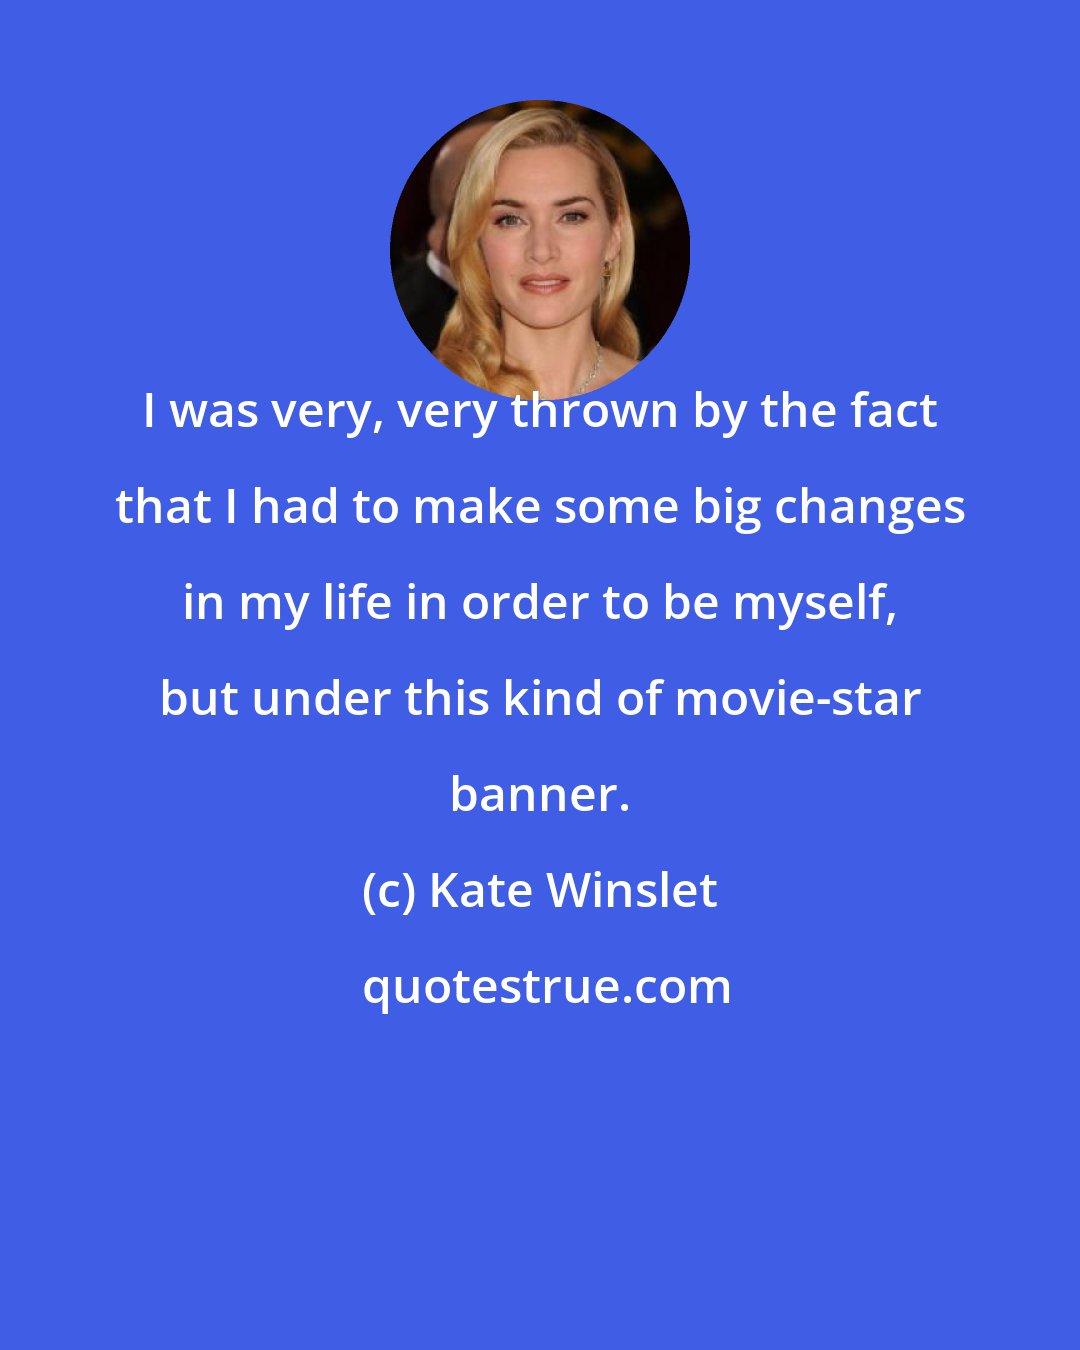 Kate Winslet: I was very, very thrown by the fact that I had to make some big changes in my life in order to be myself, but under this kind of movie-star banner.